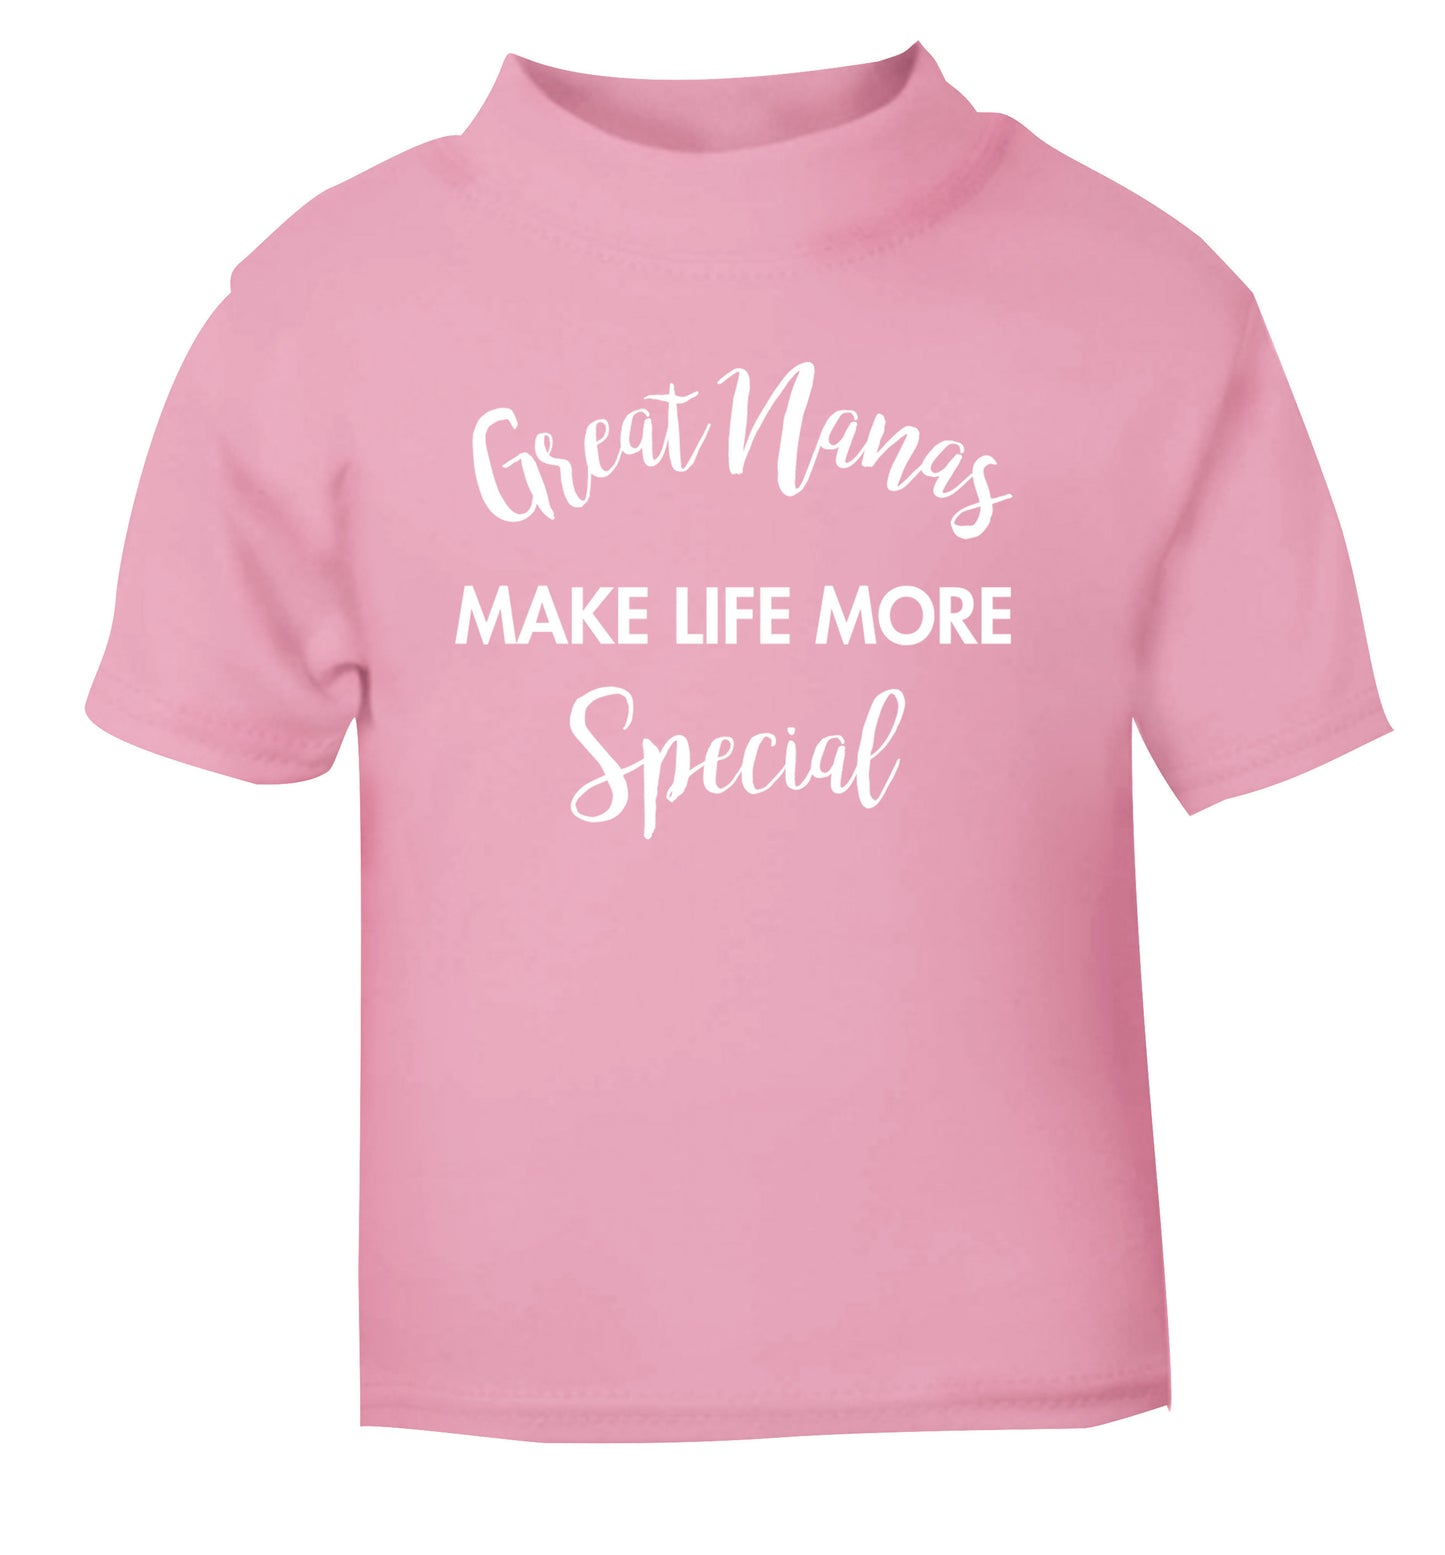 Great nanas make life more special light pink Baby Toddler Tshirt 2 Years